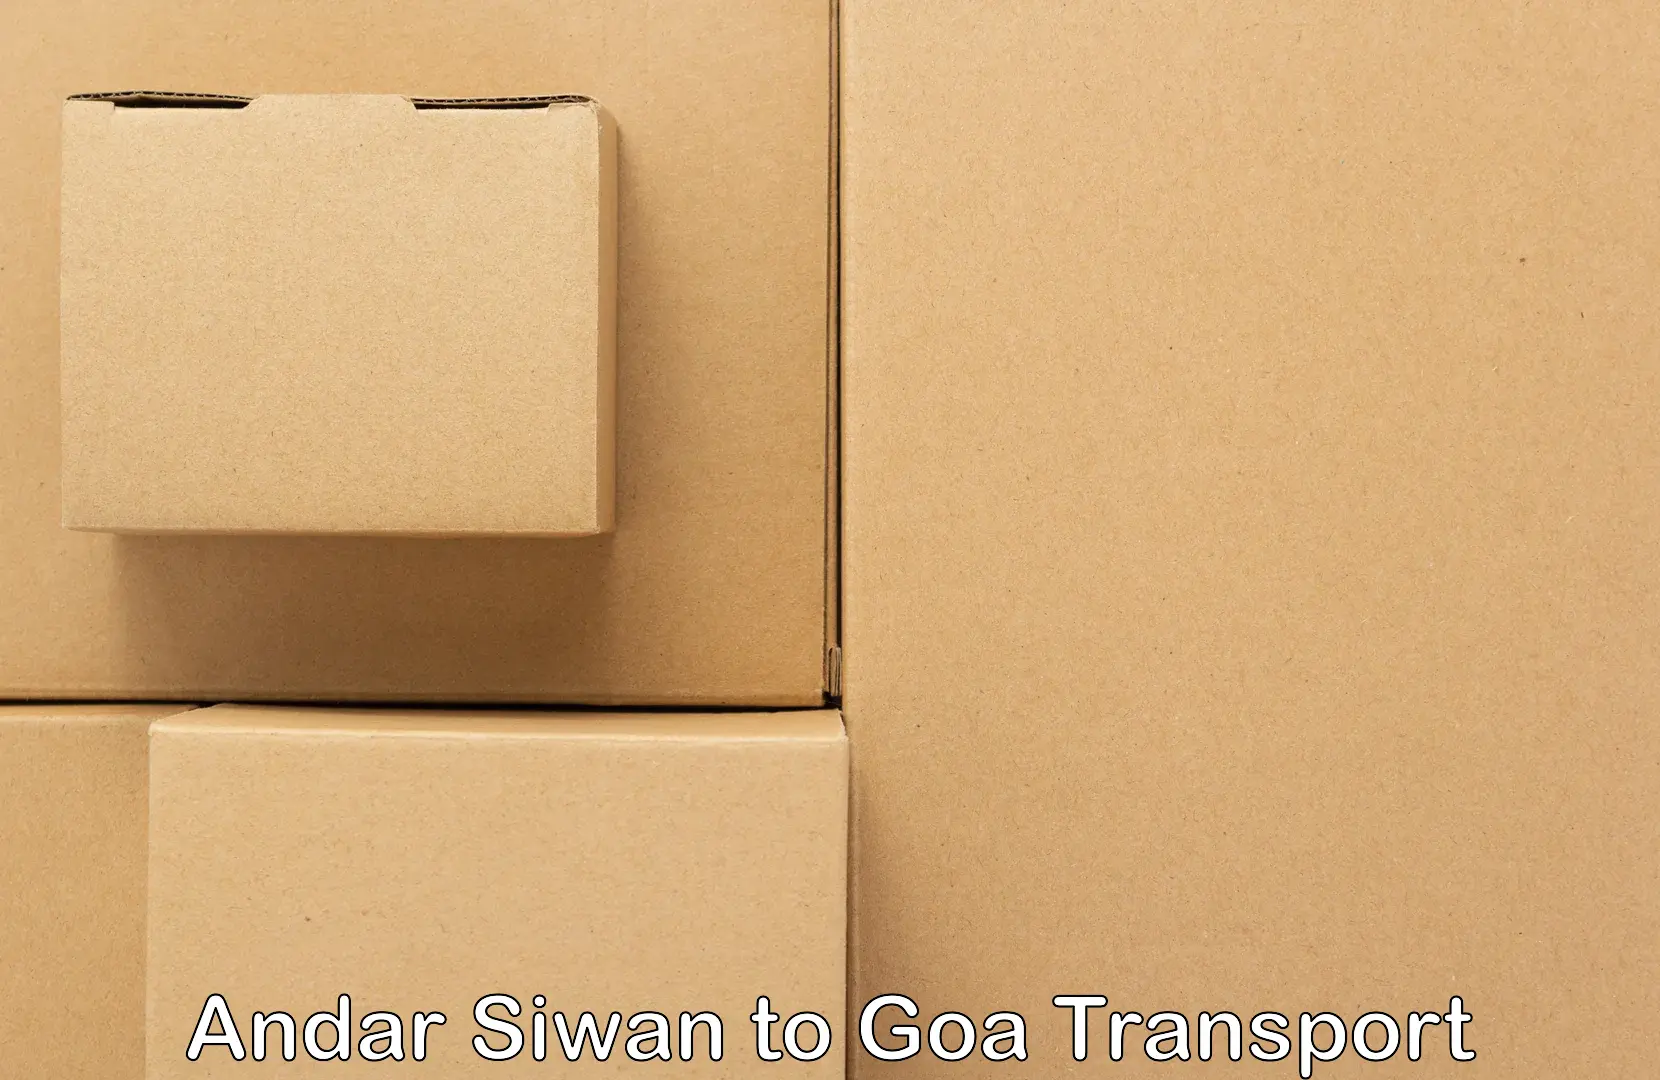 Commercial transport service Andar Siwan to Goa